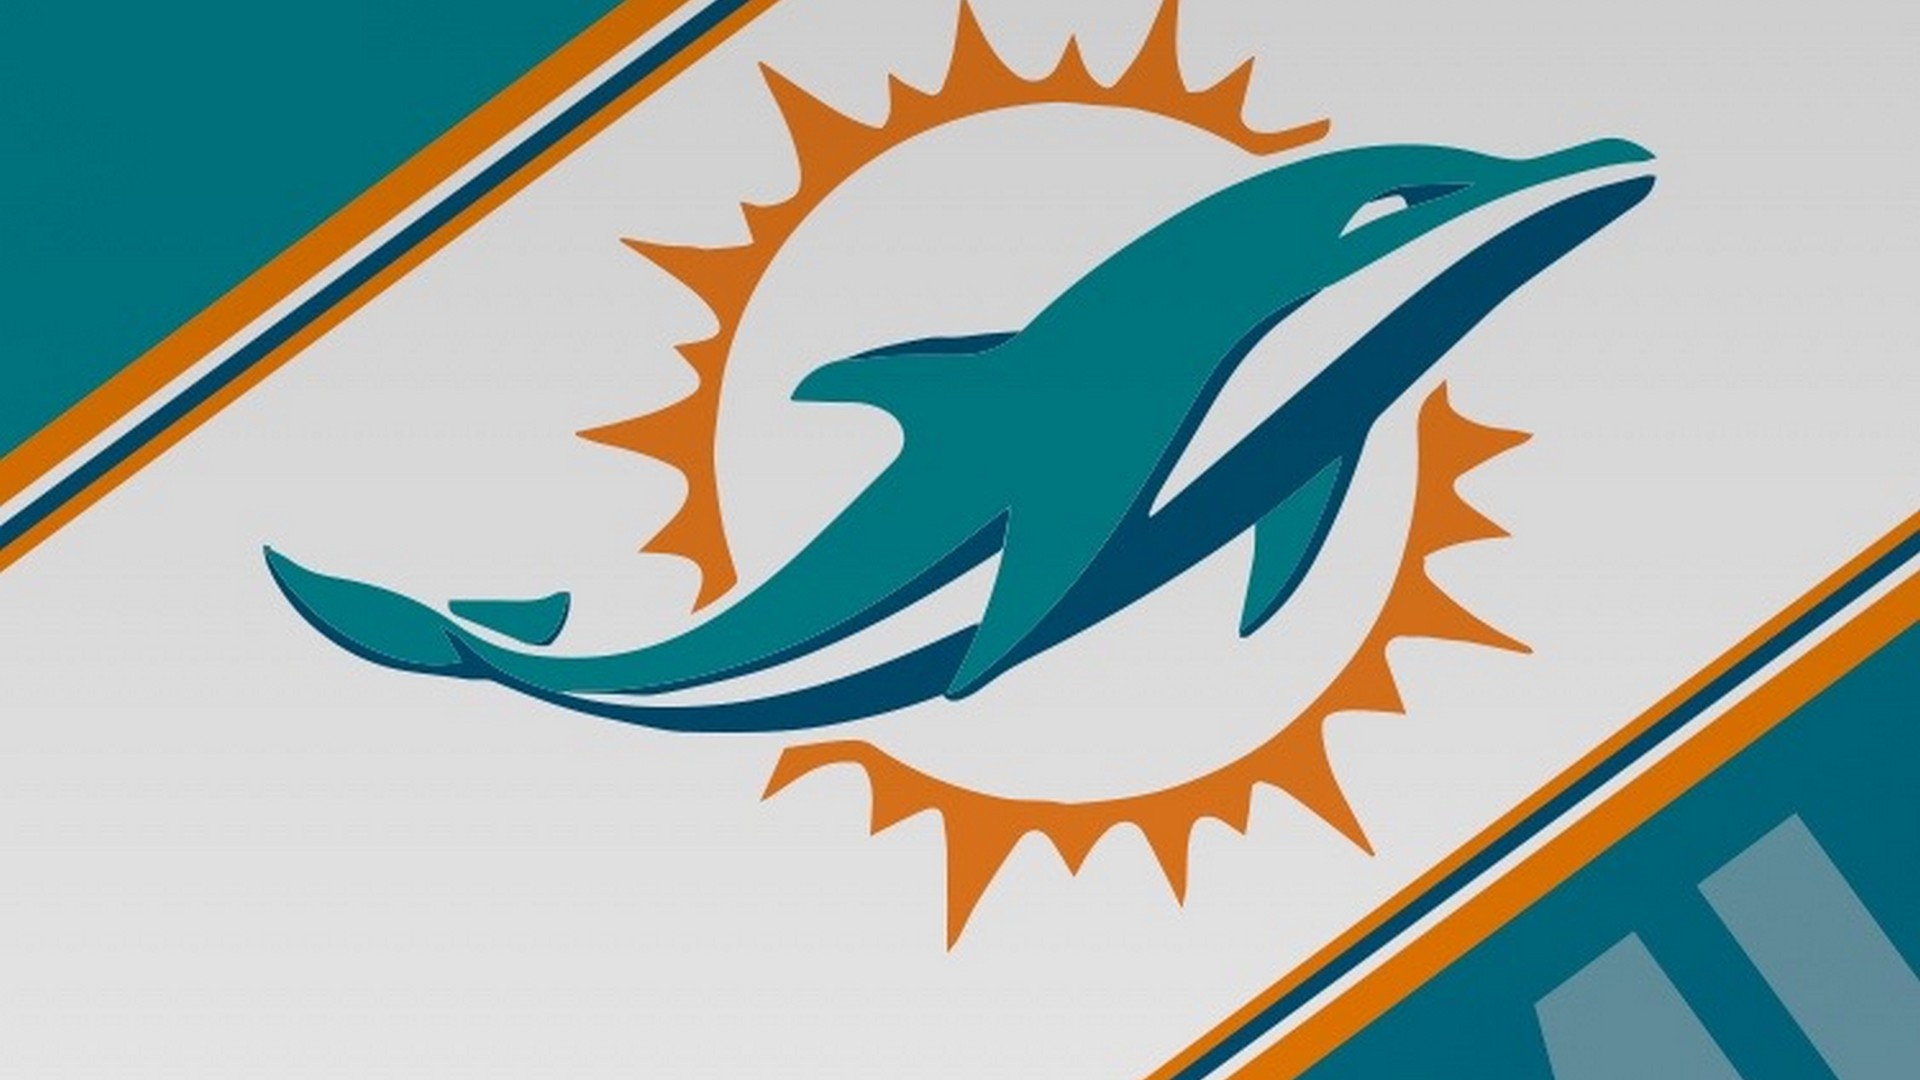 Wallpapers HD Miami Dolphins With Resolution 1920X1080 pixel. You can make this wallpaper for your Mac or Windows Desktop Background, iPhone, Android or Tablet and another Smartphone device for free